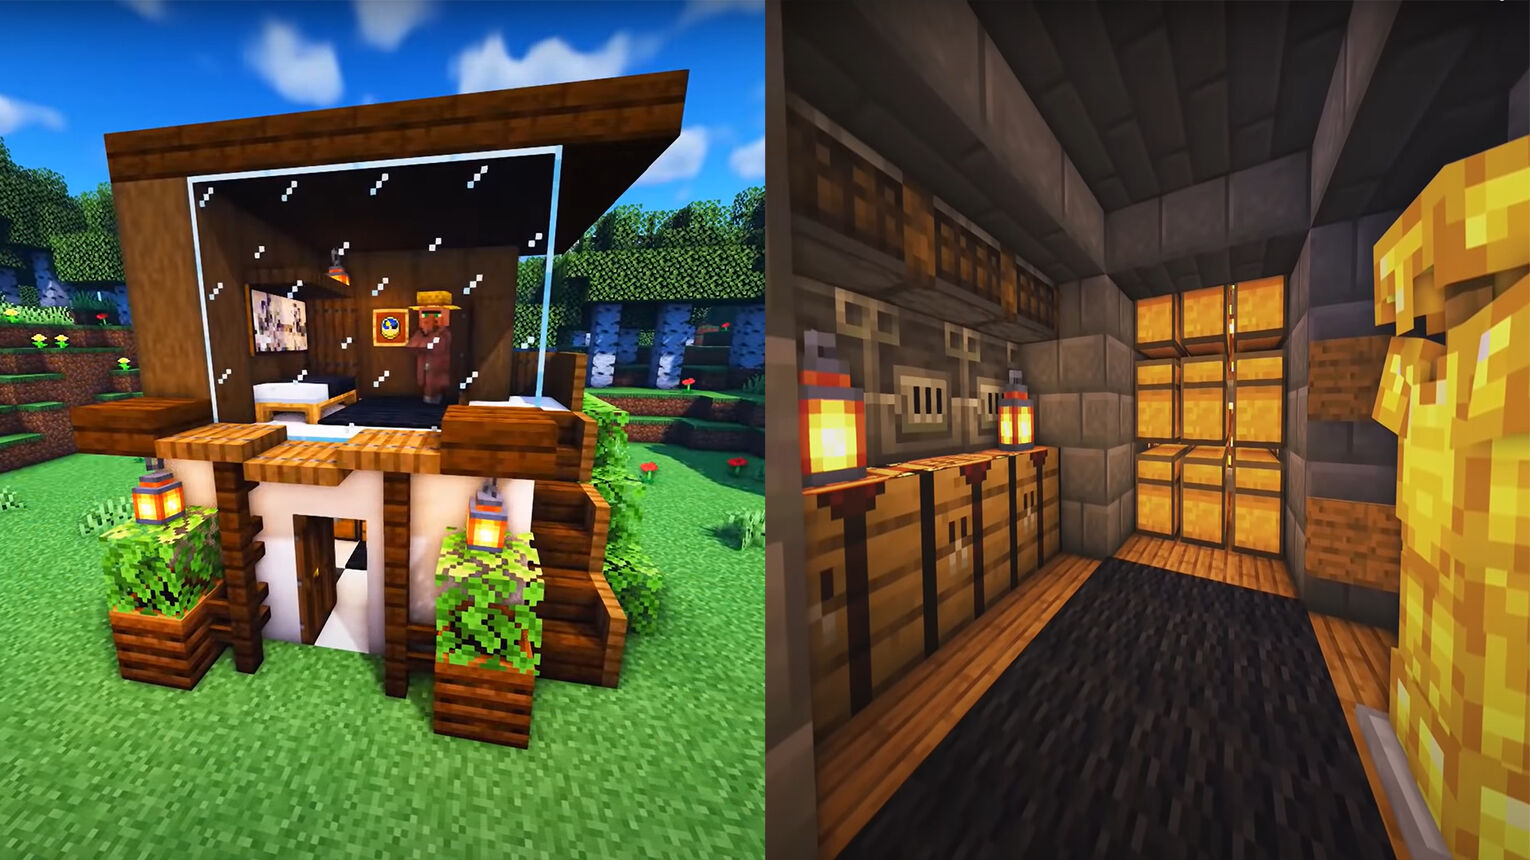 Design ideas for smallest houses in Minecraft